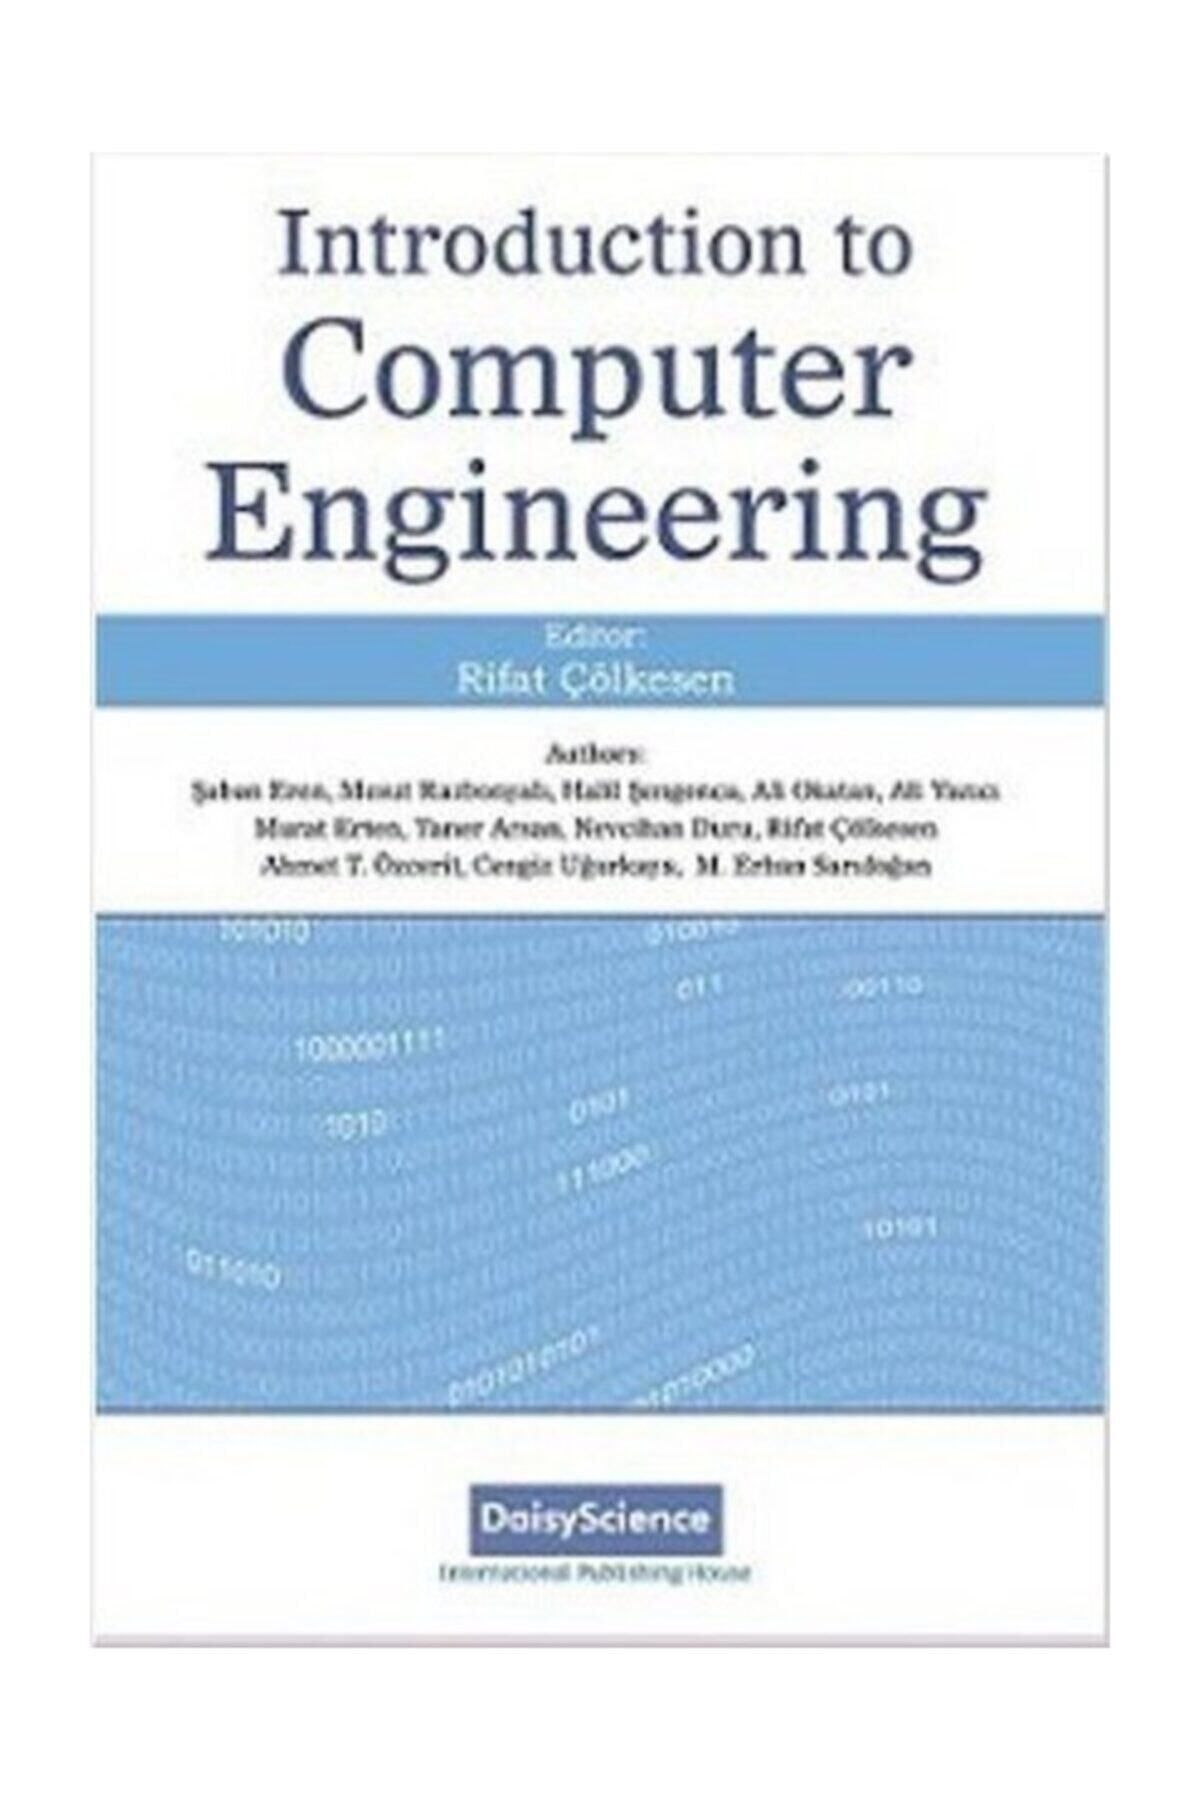 Daisyscience Introduction To Computer Engineering